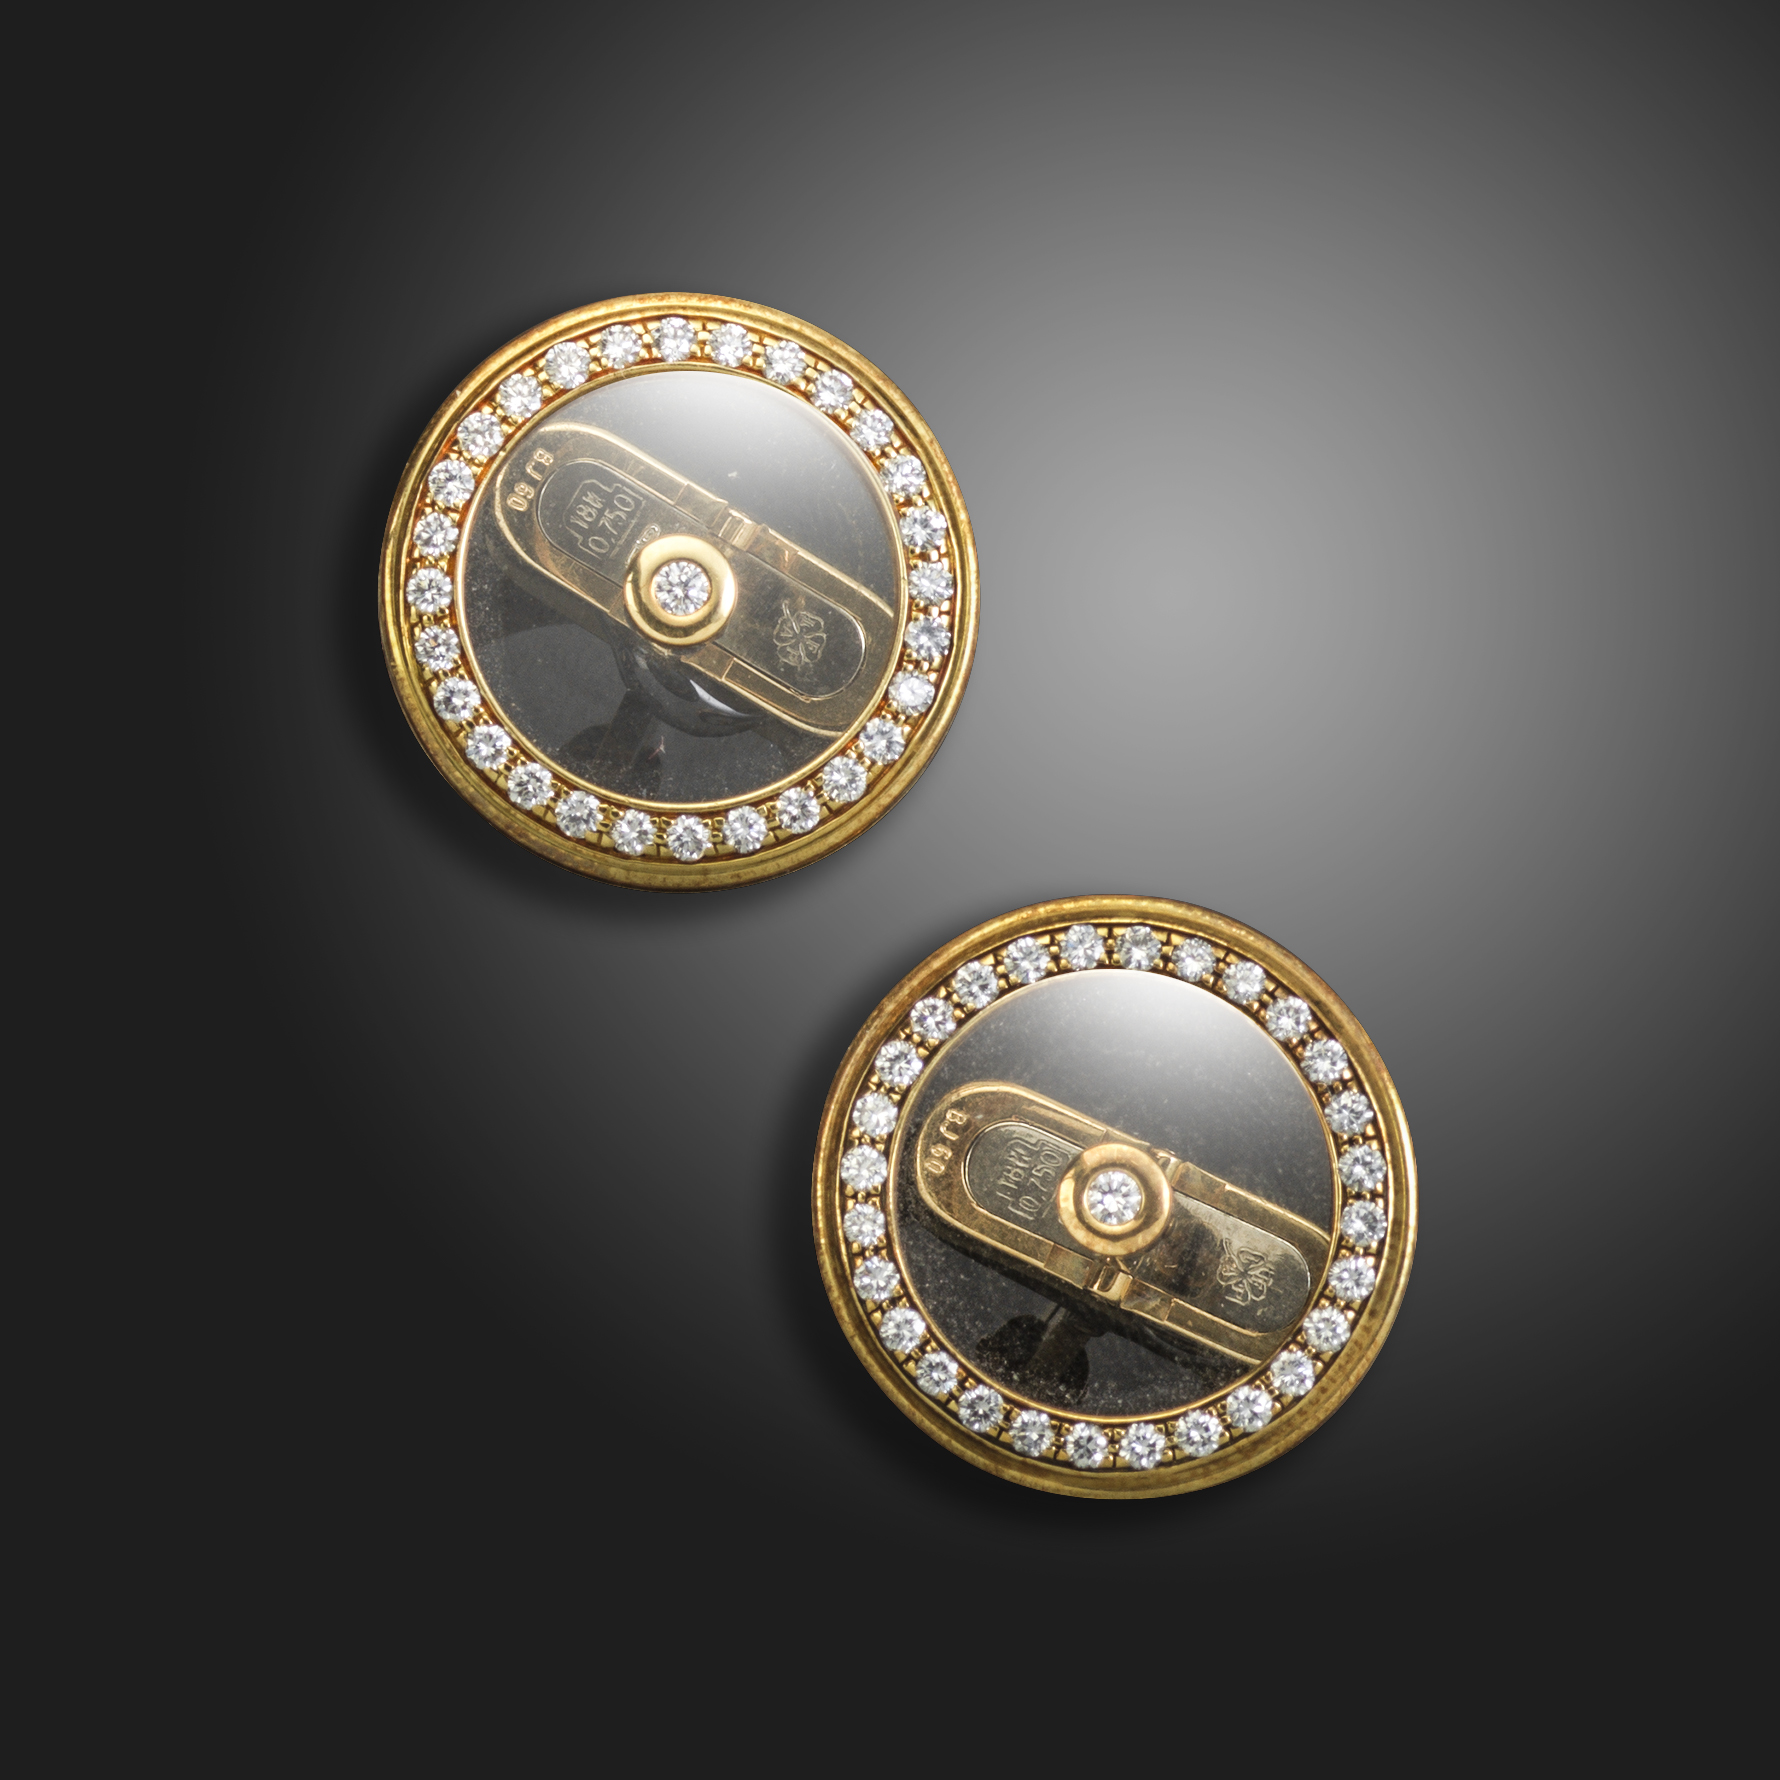 A pair of diamond and rock crystal circular cufflinks, the crystal discs each centred with a round